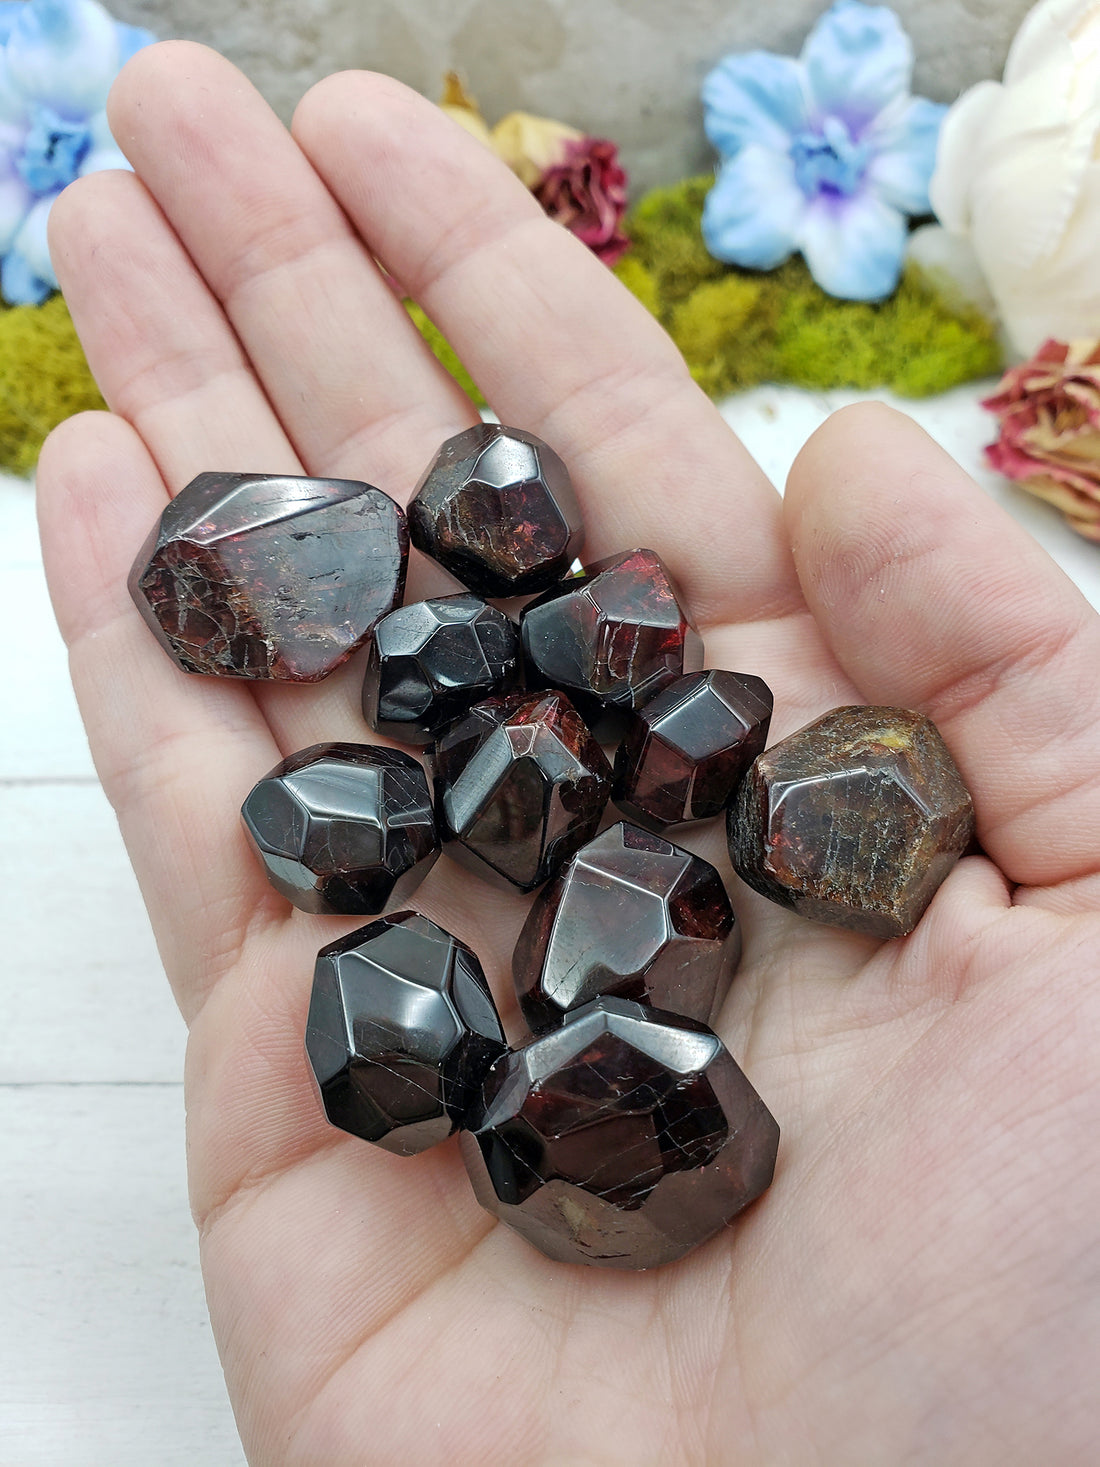 Faceted Polished Garnet Gemstone - Stone of Wishes and Dreams